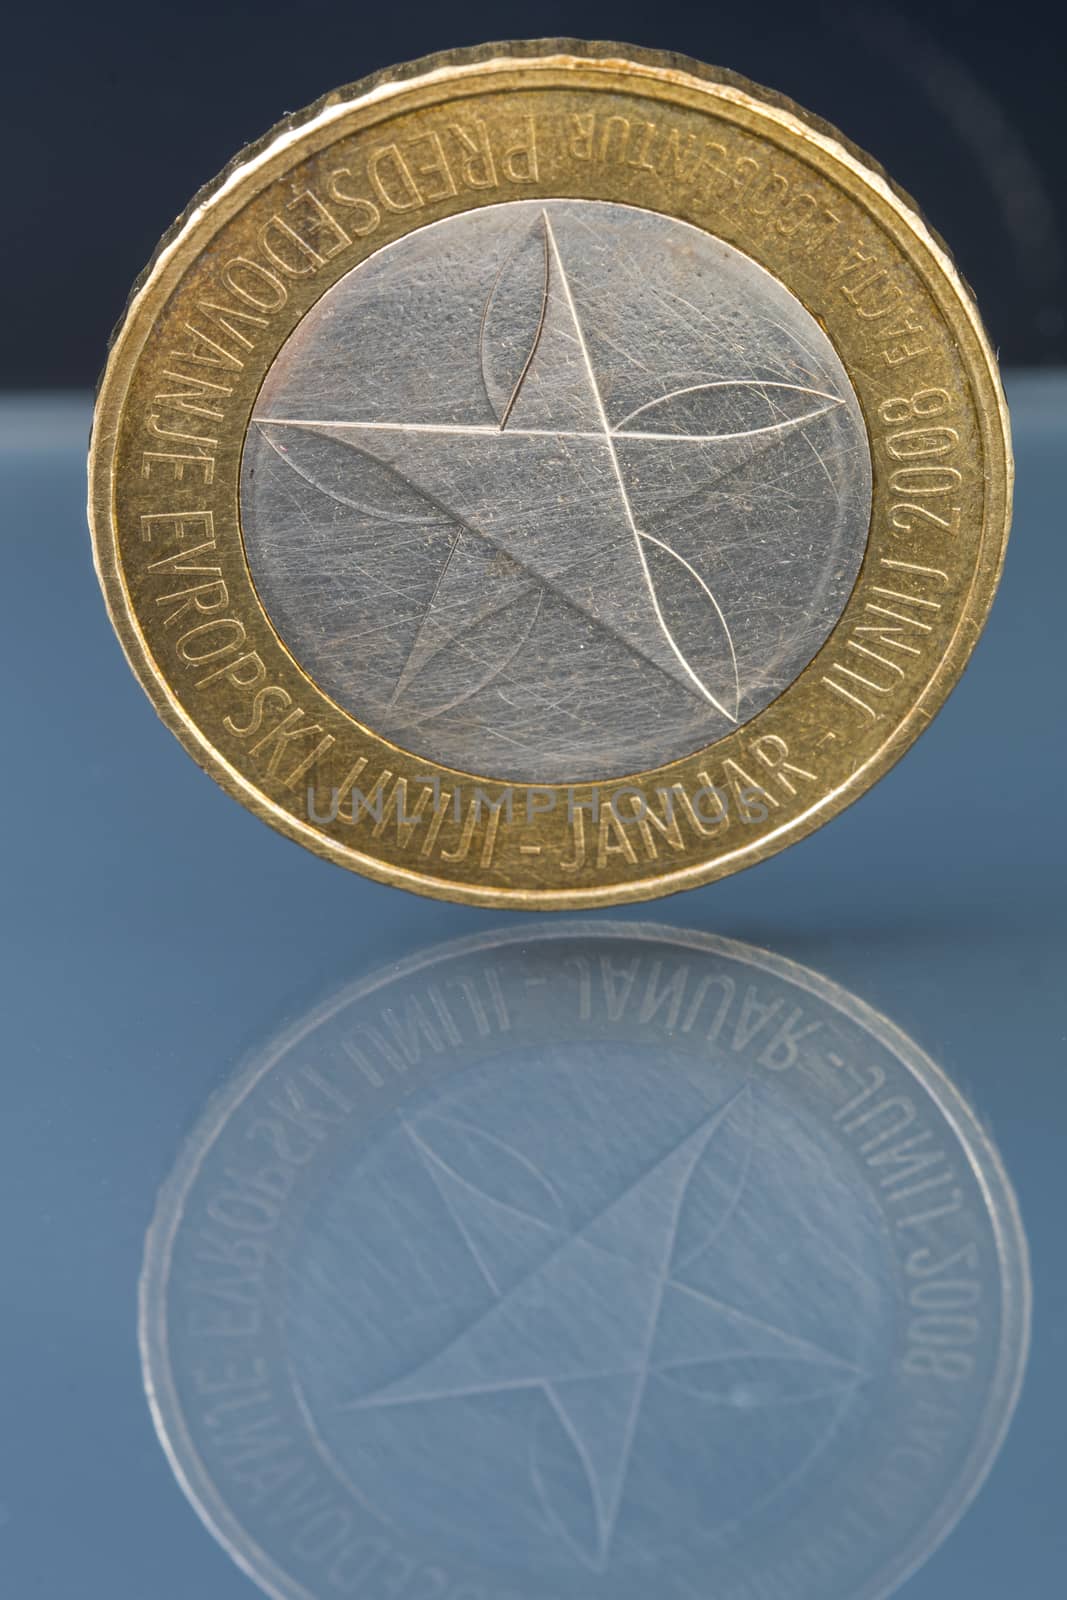 Rare limited edition three 3 Euro coin issued by Slovenia by asafaric